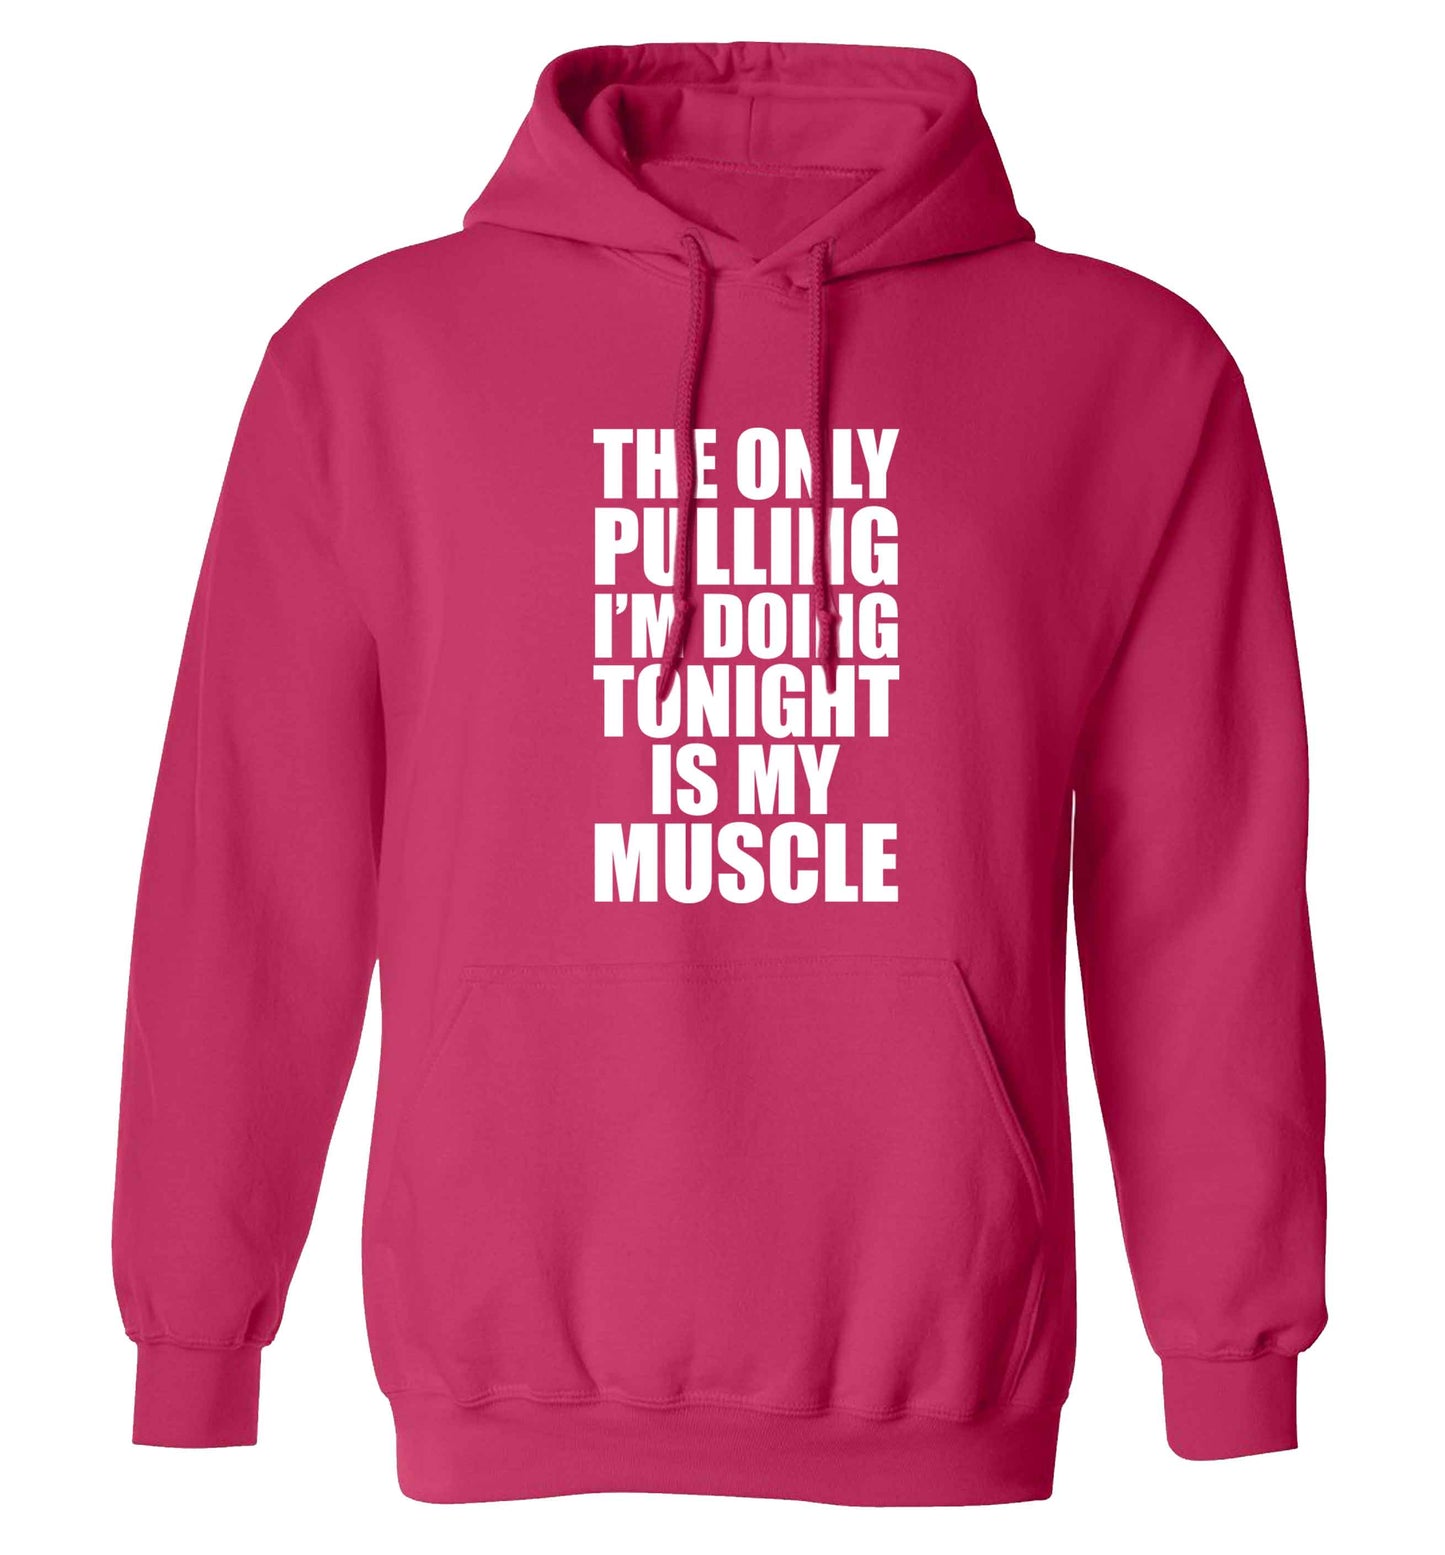 The only pulling I'm doing tonight is my muscle adults unisex pink hoodie 2XL